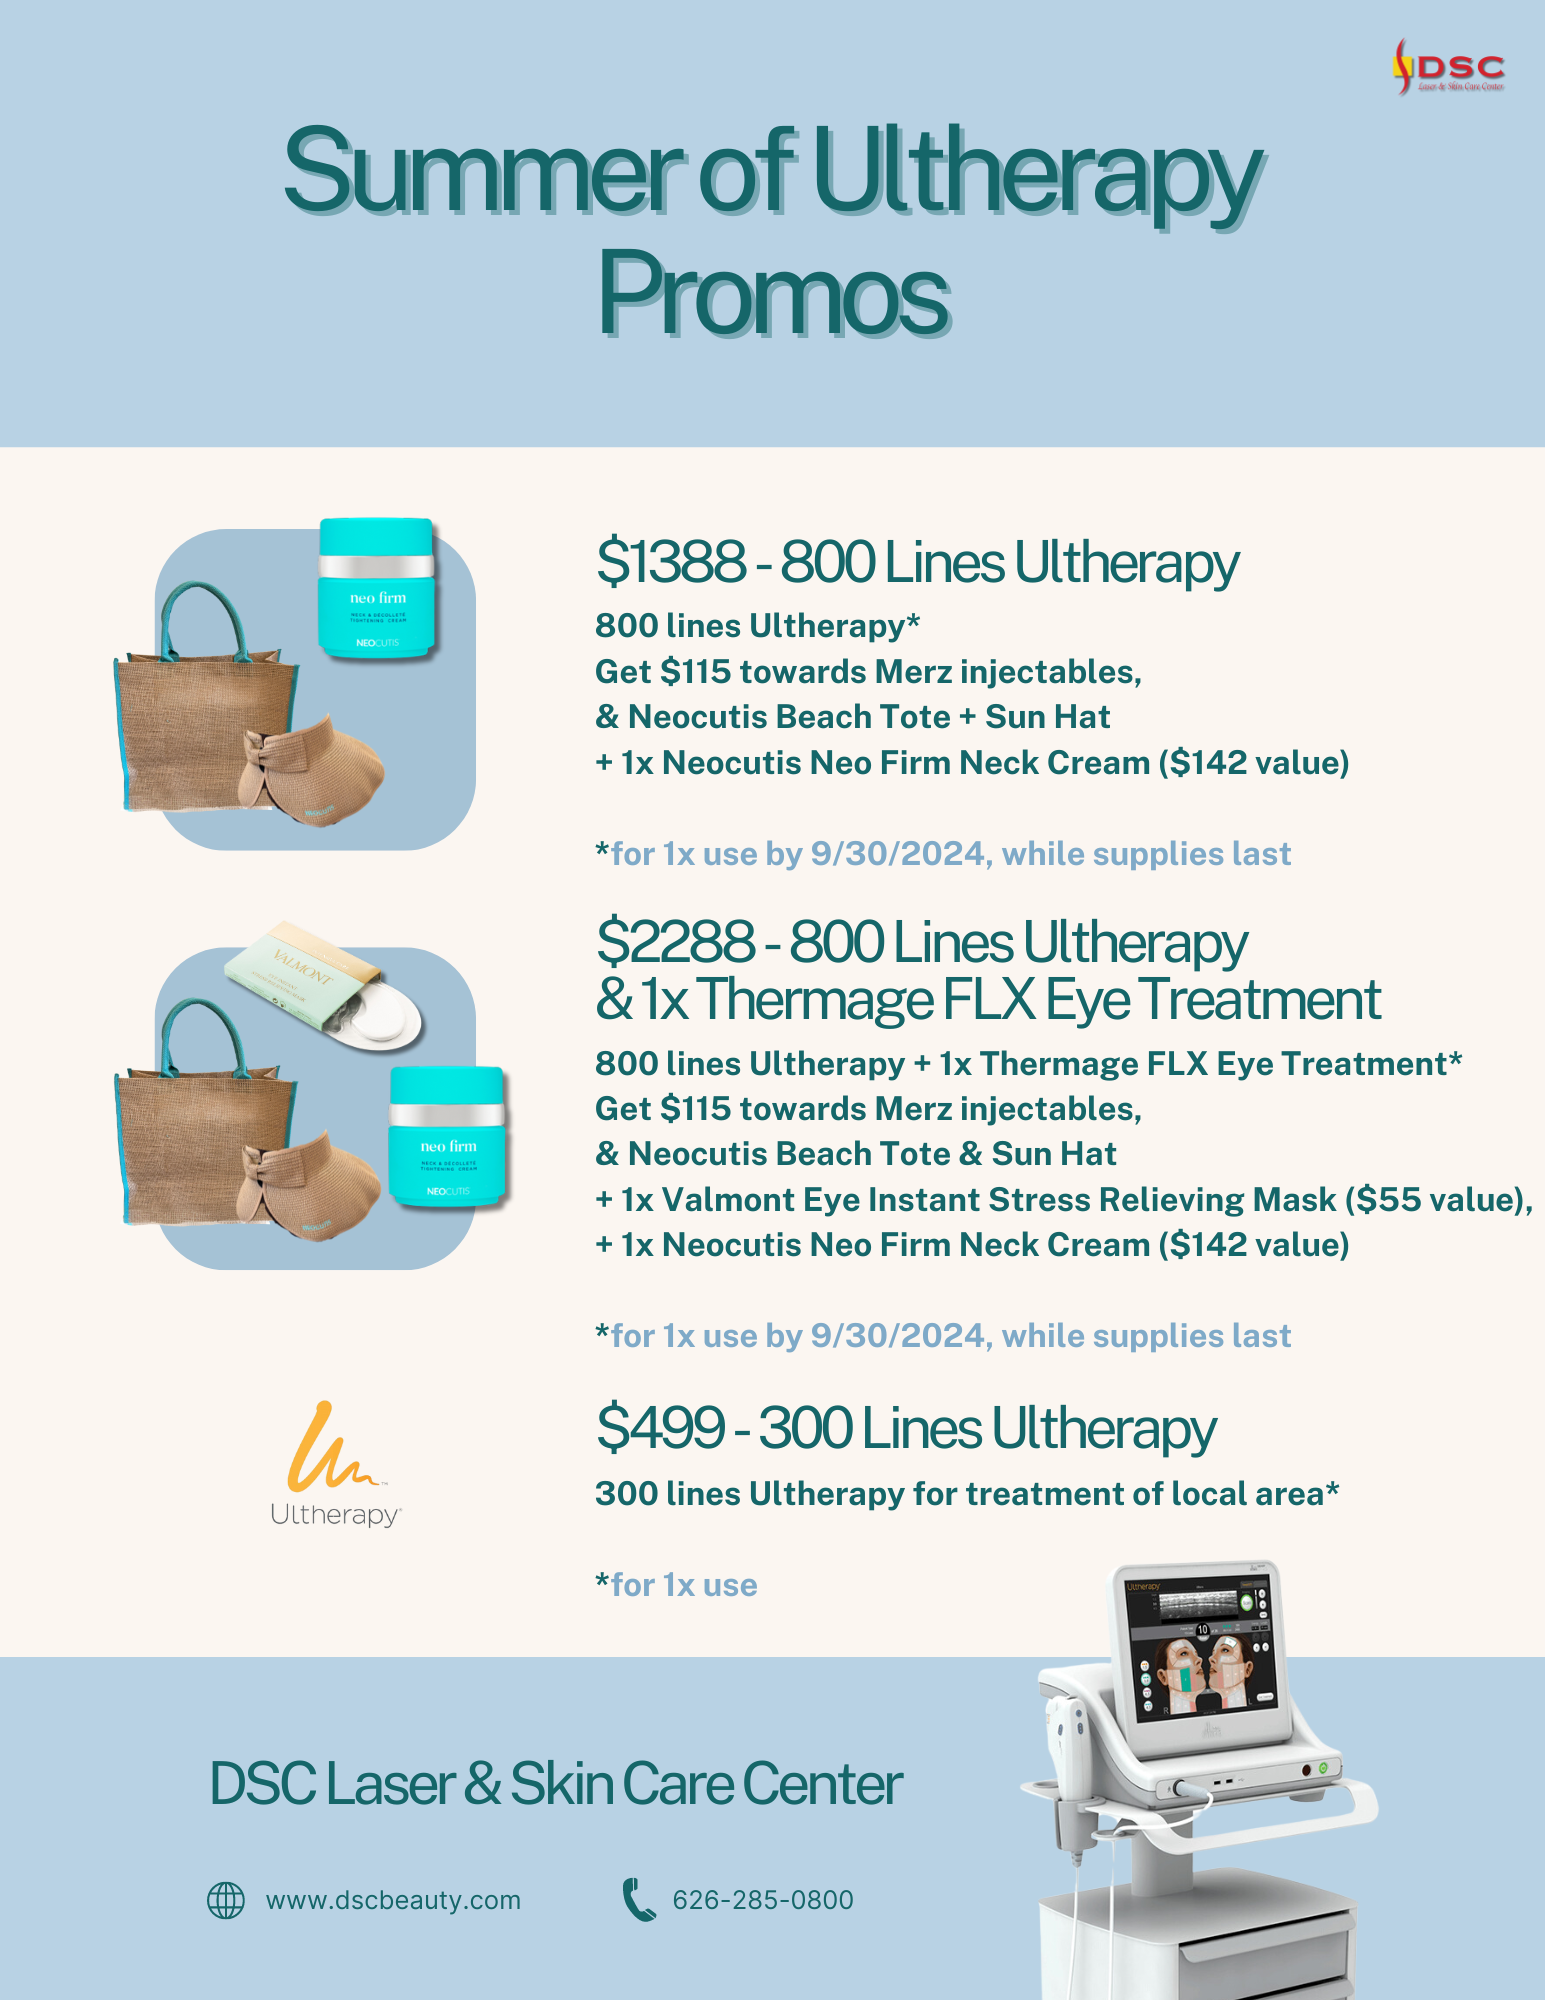 DSC Ultherapy Month June 2024 Promotions Flyer with text $1388 - 800 Lines Ultherapy 800 lines Ultherapy* Get $115 towards Merz injectables, & Neocutis Beach Tote + Sun Hat + 1x Neocutis Neo Firm Neck Cream ($142 value) *for 1x use by 9/30/2024, while supplies last $2288 - 800 Lines Ultherapy & 1x Thermage FLX Eye Treatment 800 lines Ultherapy + 1x Thermage FLX Eye Treatment* Get $115 towards Merz injectables, & Neocutis Beach Tote & Sun Hat + 1x Valmont Eye Instant Stress Relieving Mask ($55 value), + 1x Neocutis Neo Firm Neck Cream ($142 value) *for 1x use by 9/30/2024, while supplies last $499 - 300 Lines Ultherapy 300 lines Ultherapy for treatment of local area* *for 1x use